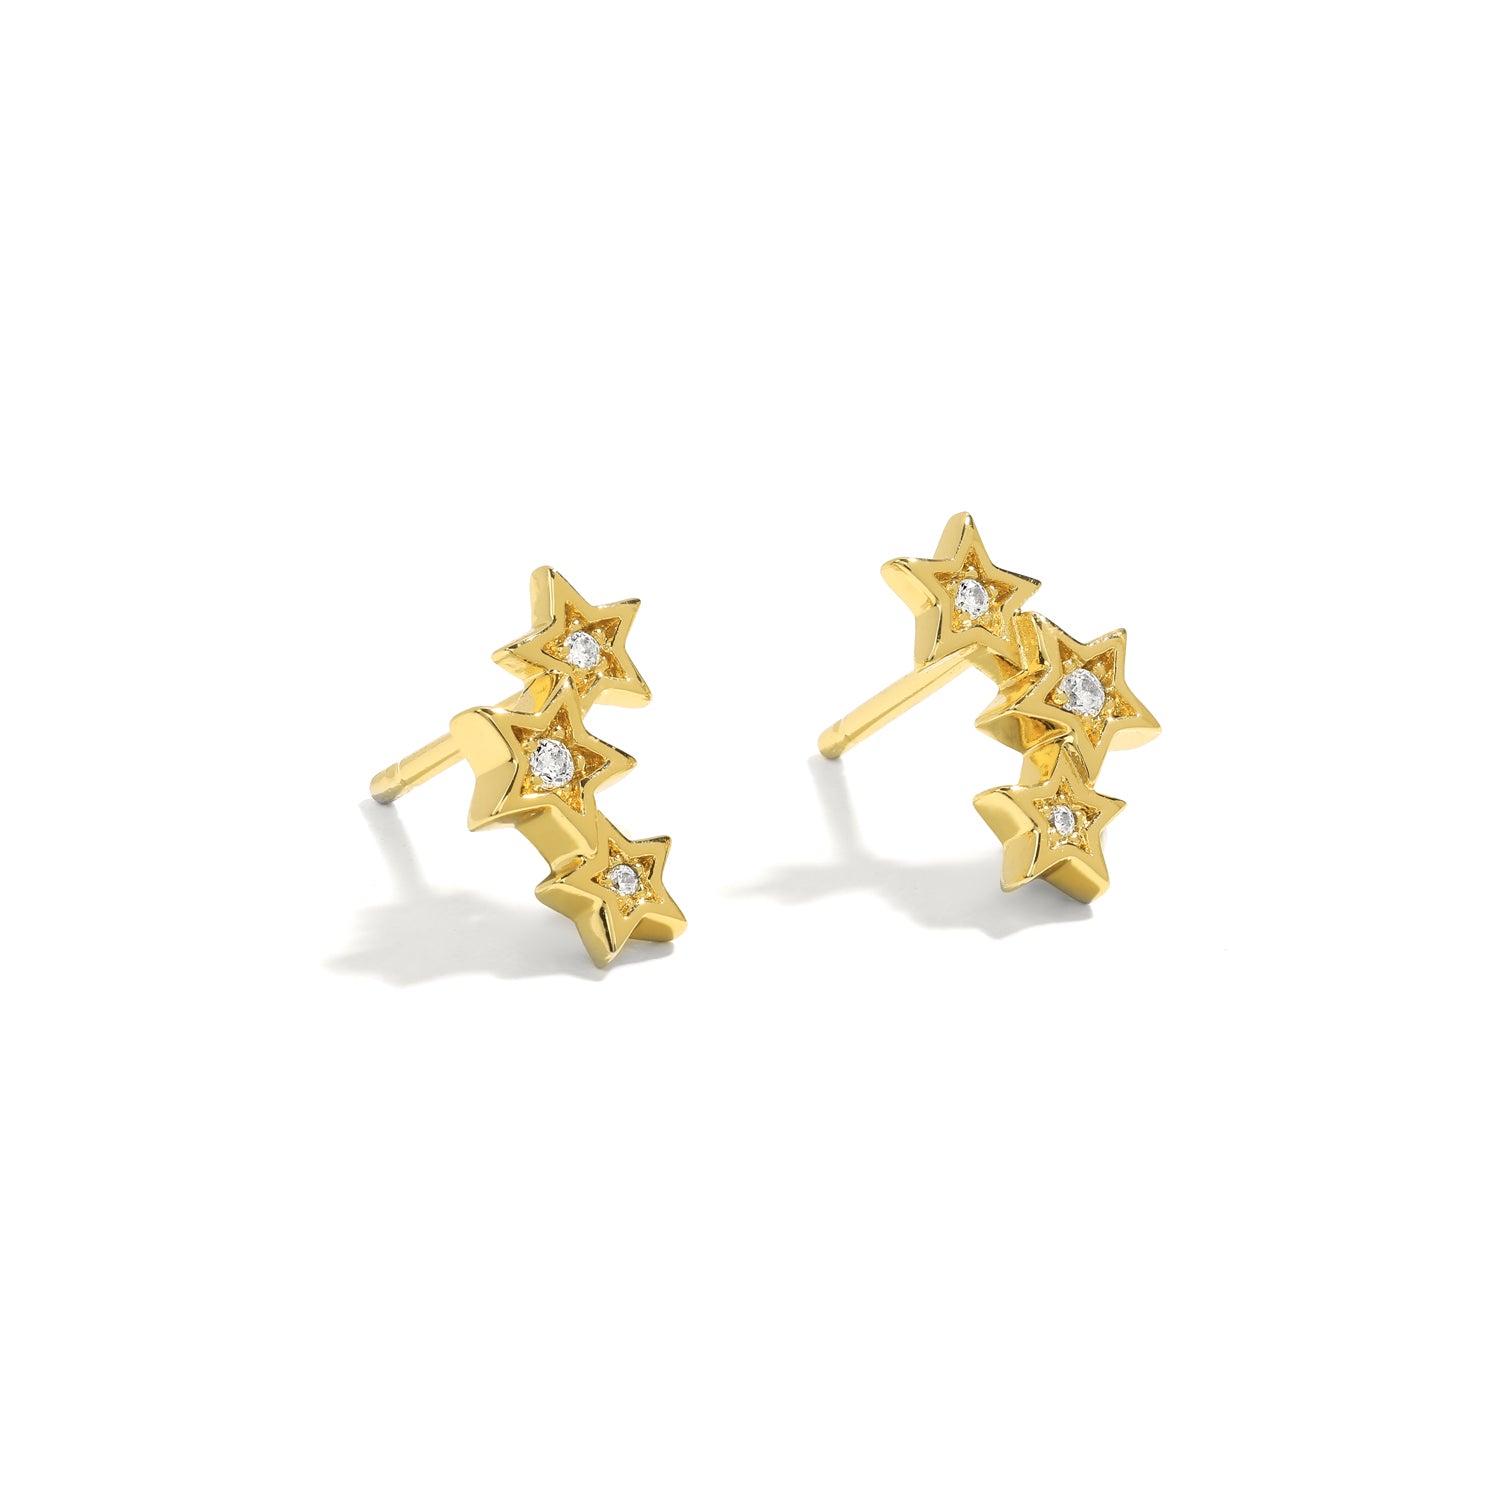 Elegant and dainty studs. Gold earrings set with cubic zirconia stones.